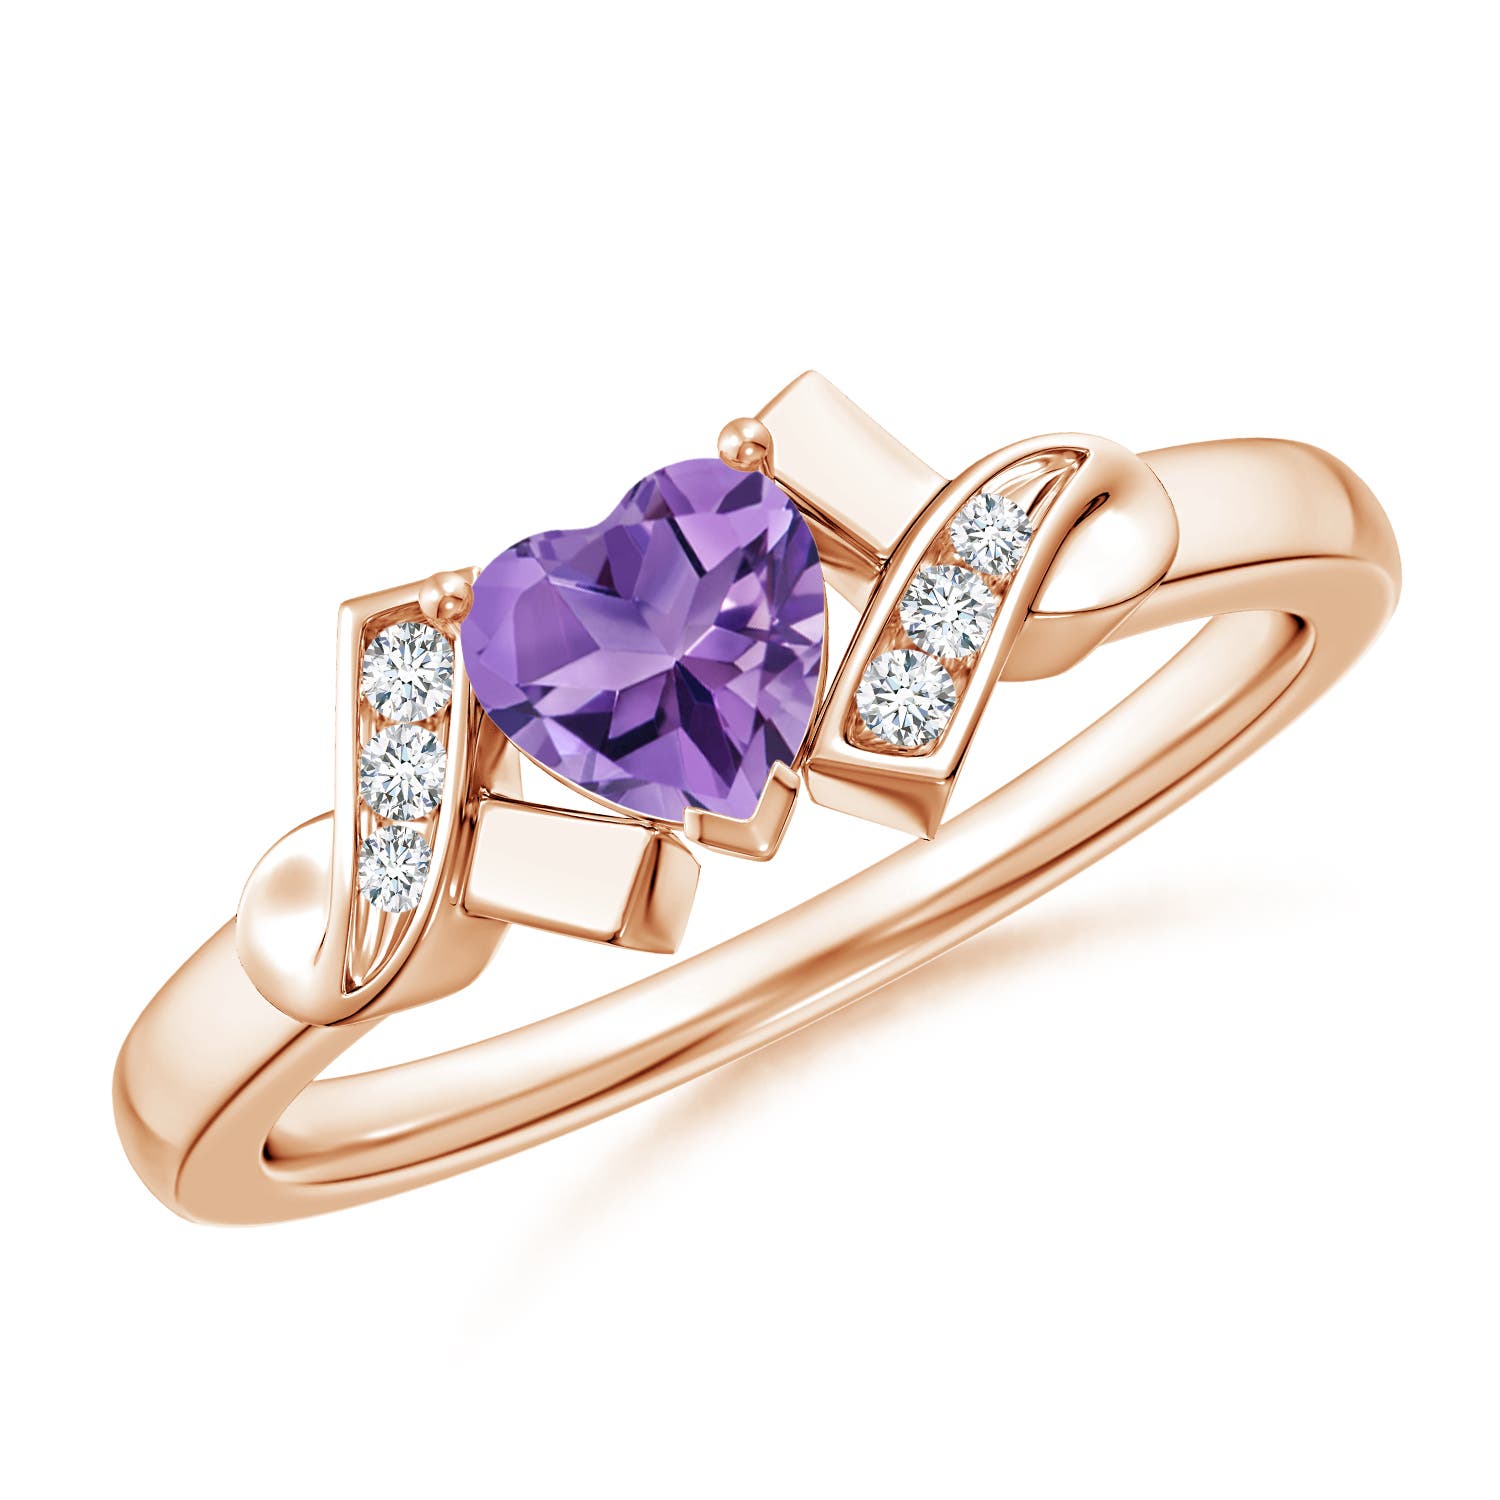 AA - Amethyst / 0.41 CT / 14 KT Rose Gold